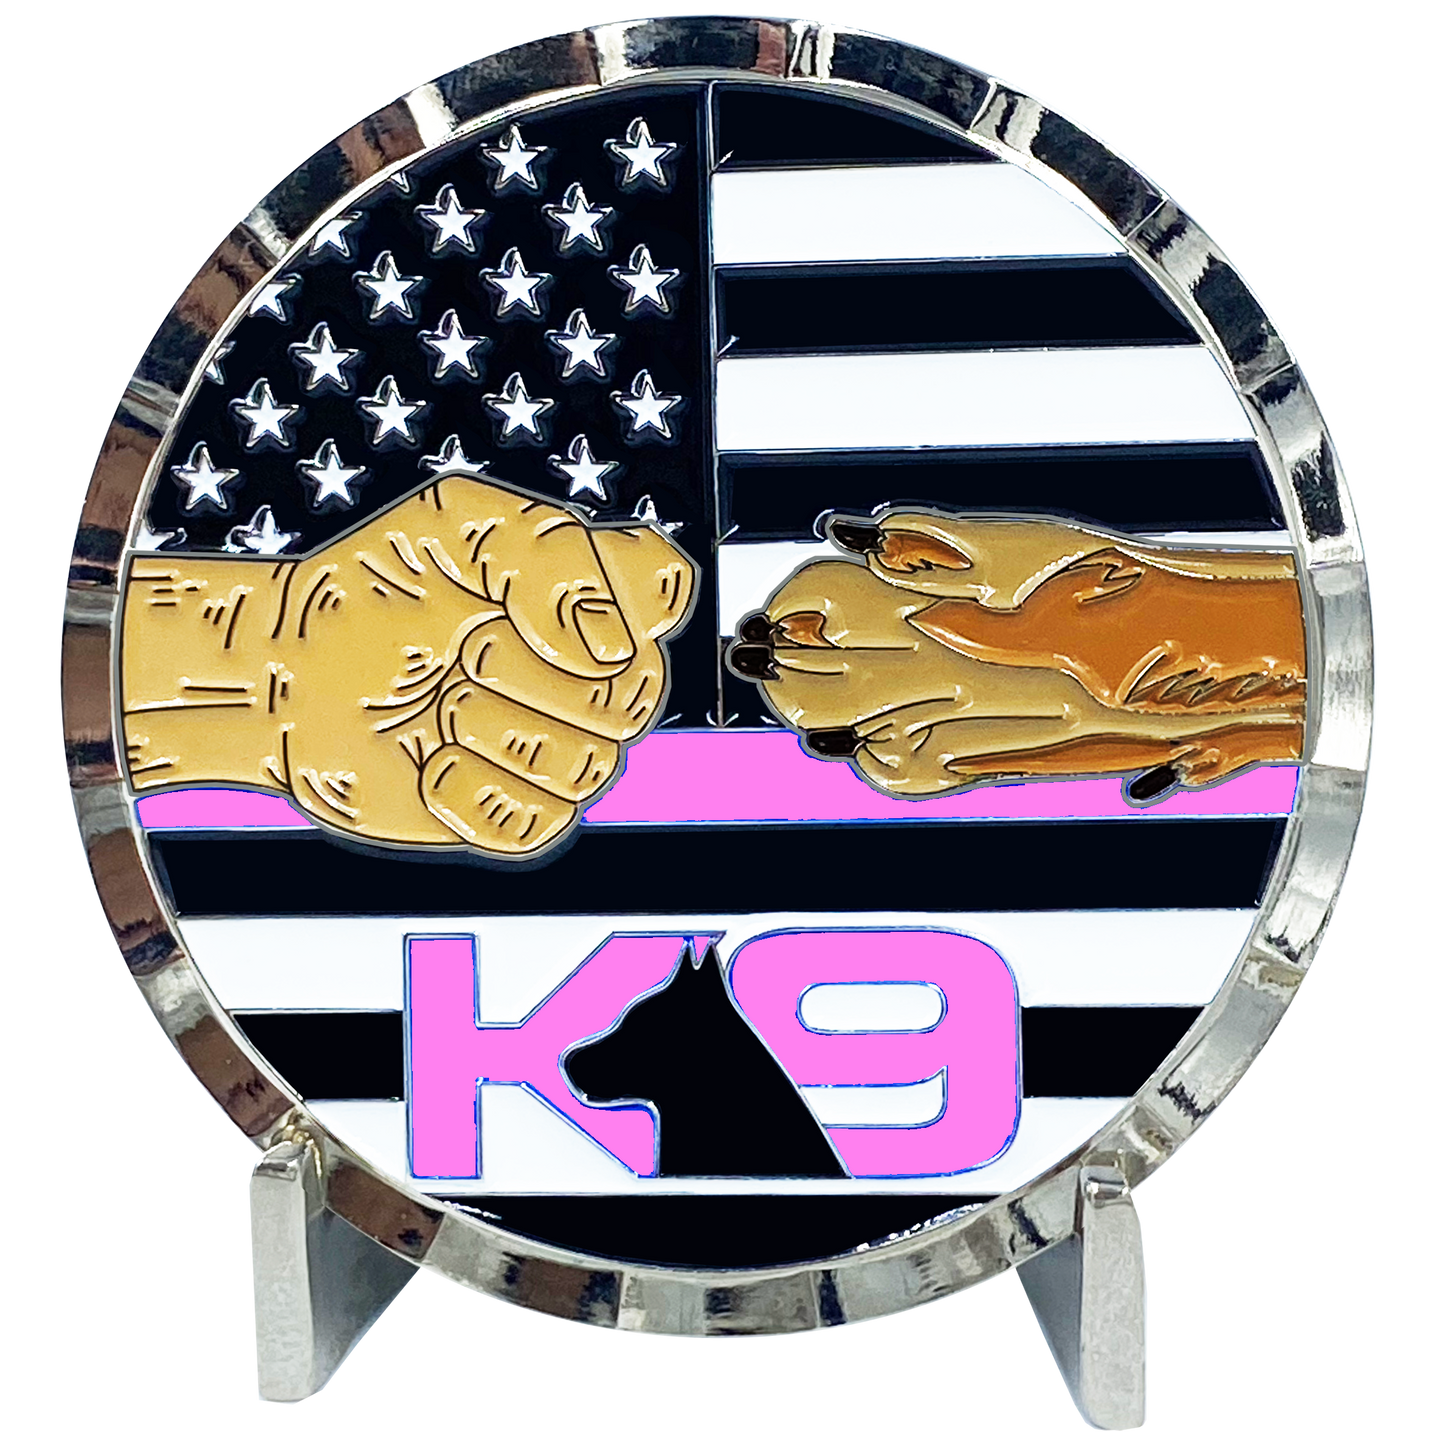 BL7-008 K9 Thin Pink Line Challenge Coin Fist Paw Bump Breast Cancer Awareness Police